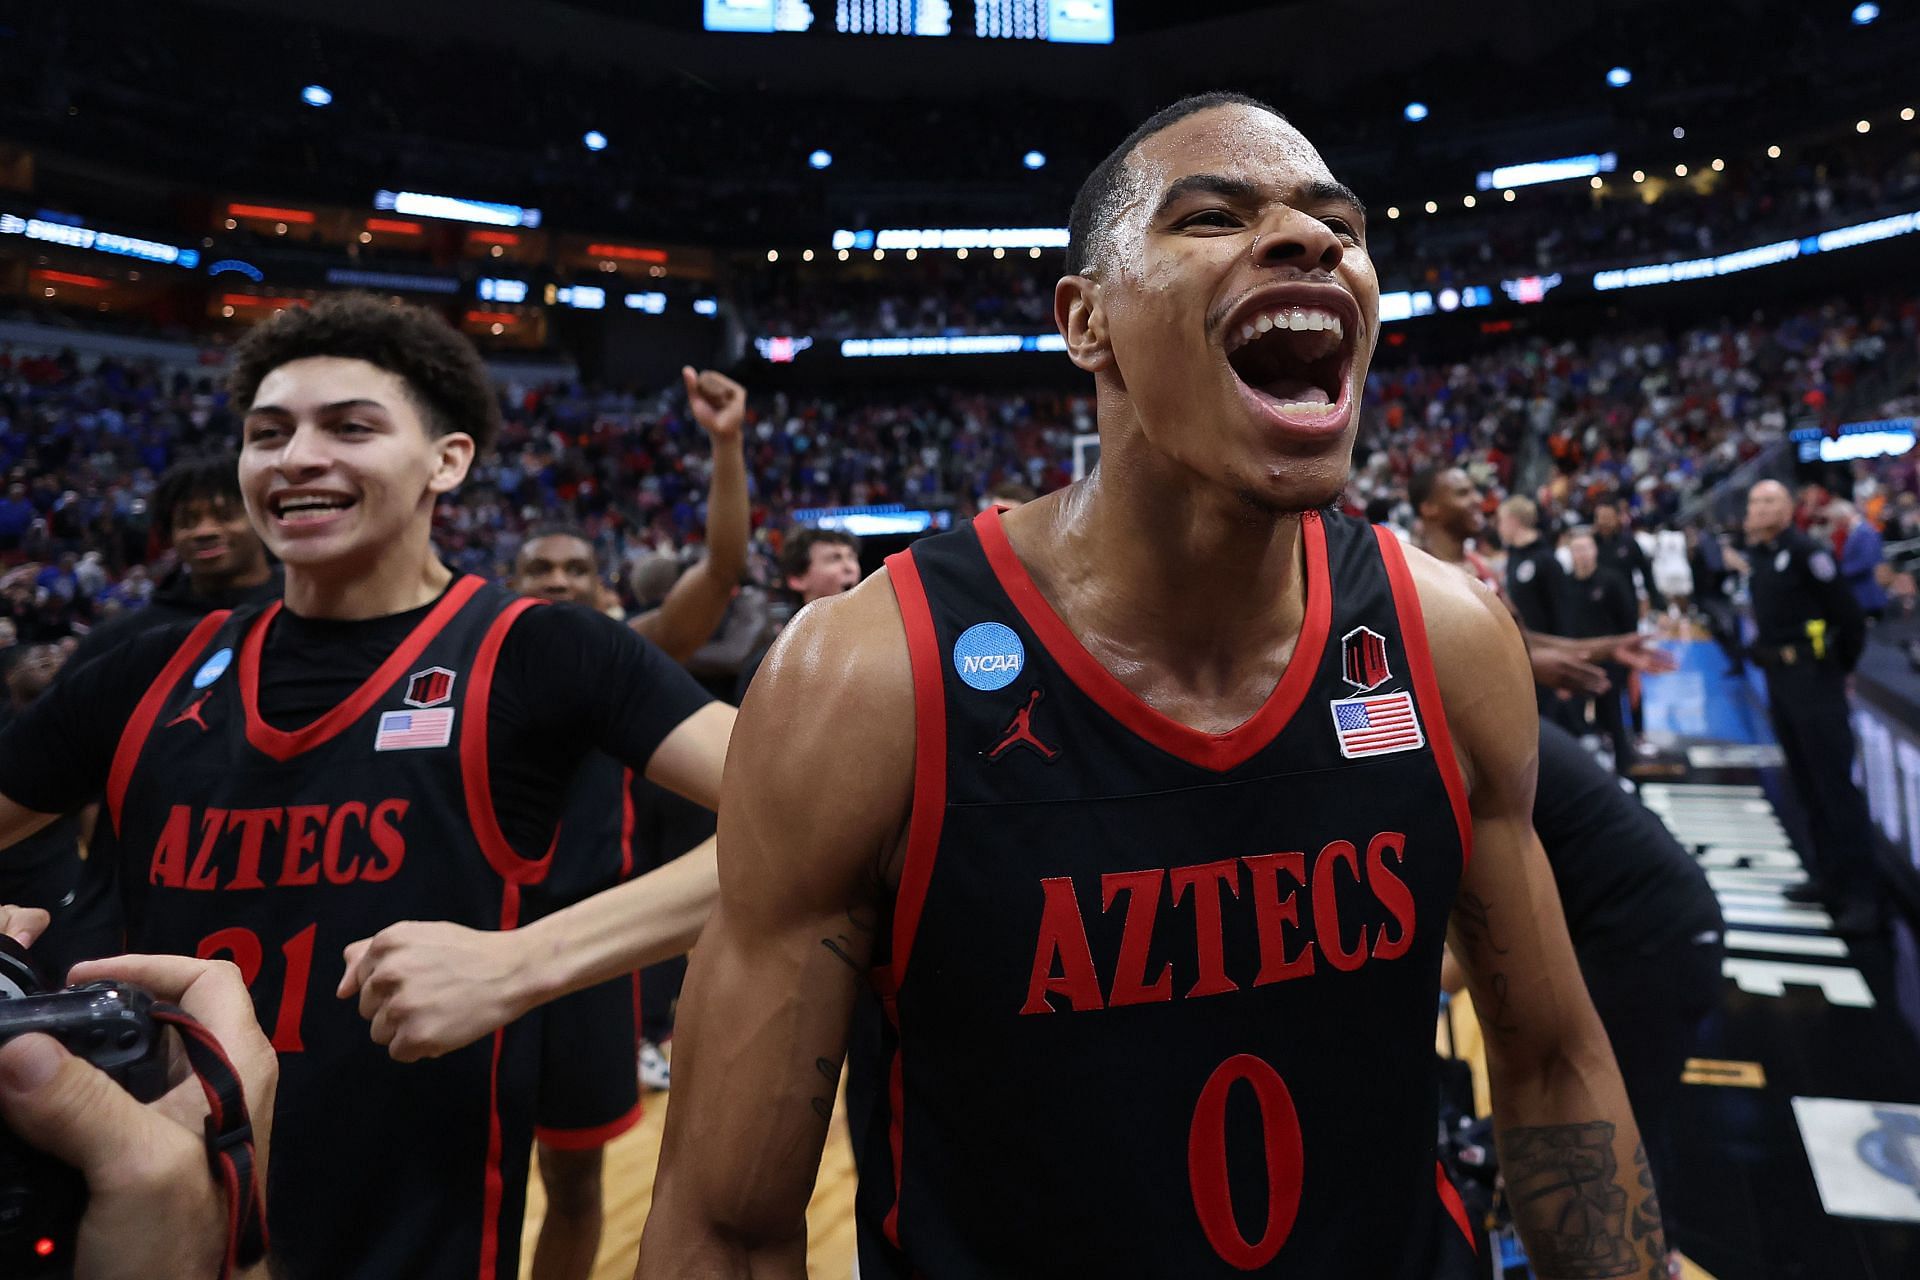 The San Diego State Aztecs had a major upset in the Sweet Sixteen (Image via Getty Images)